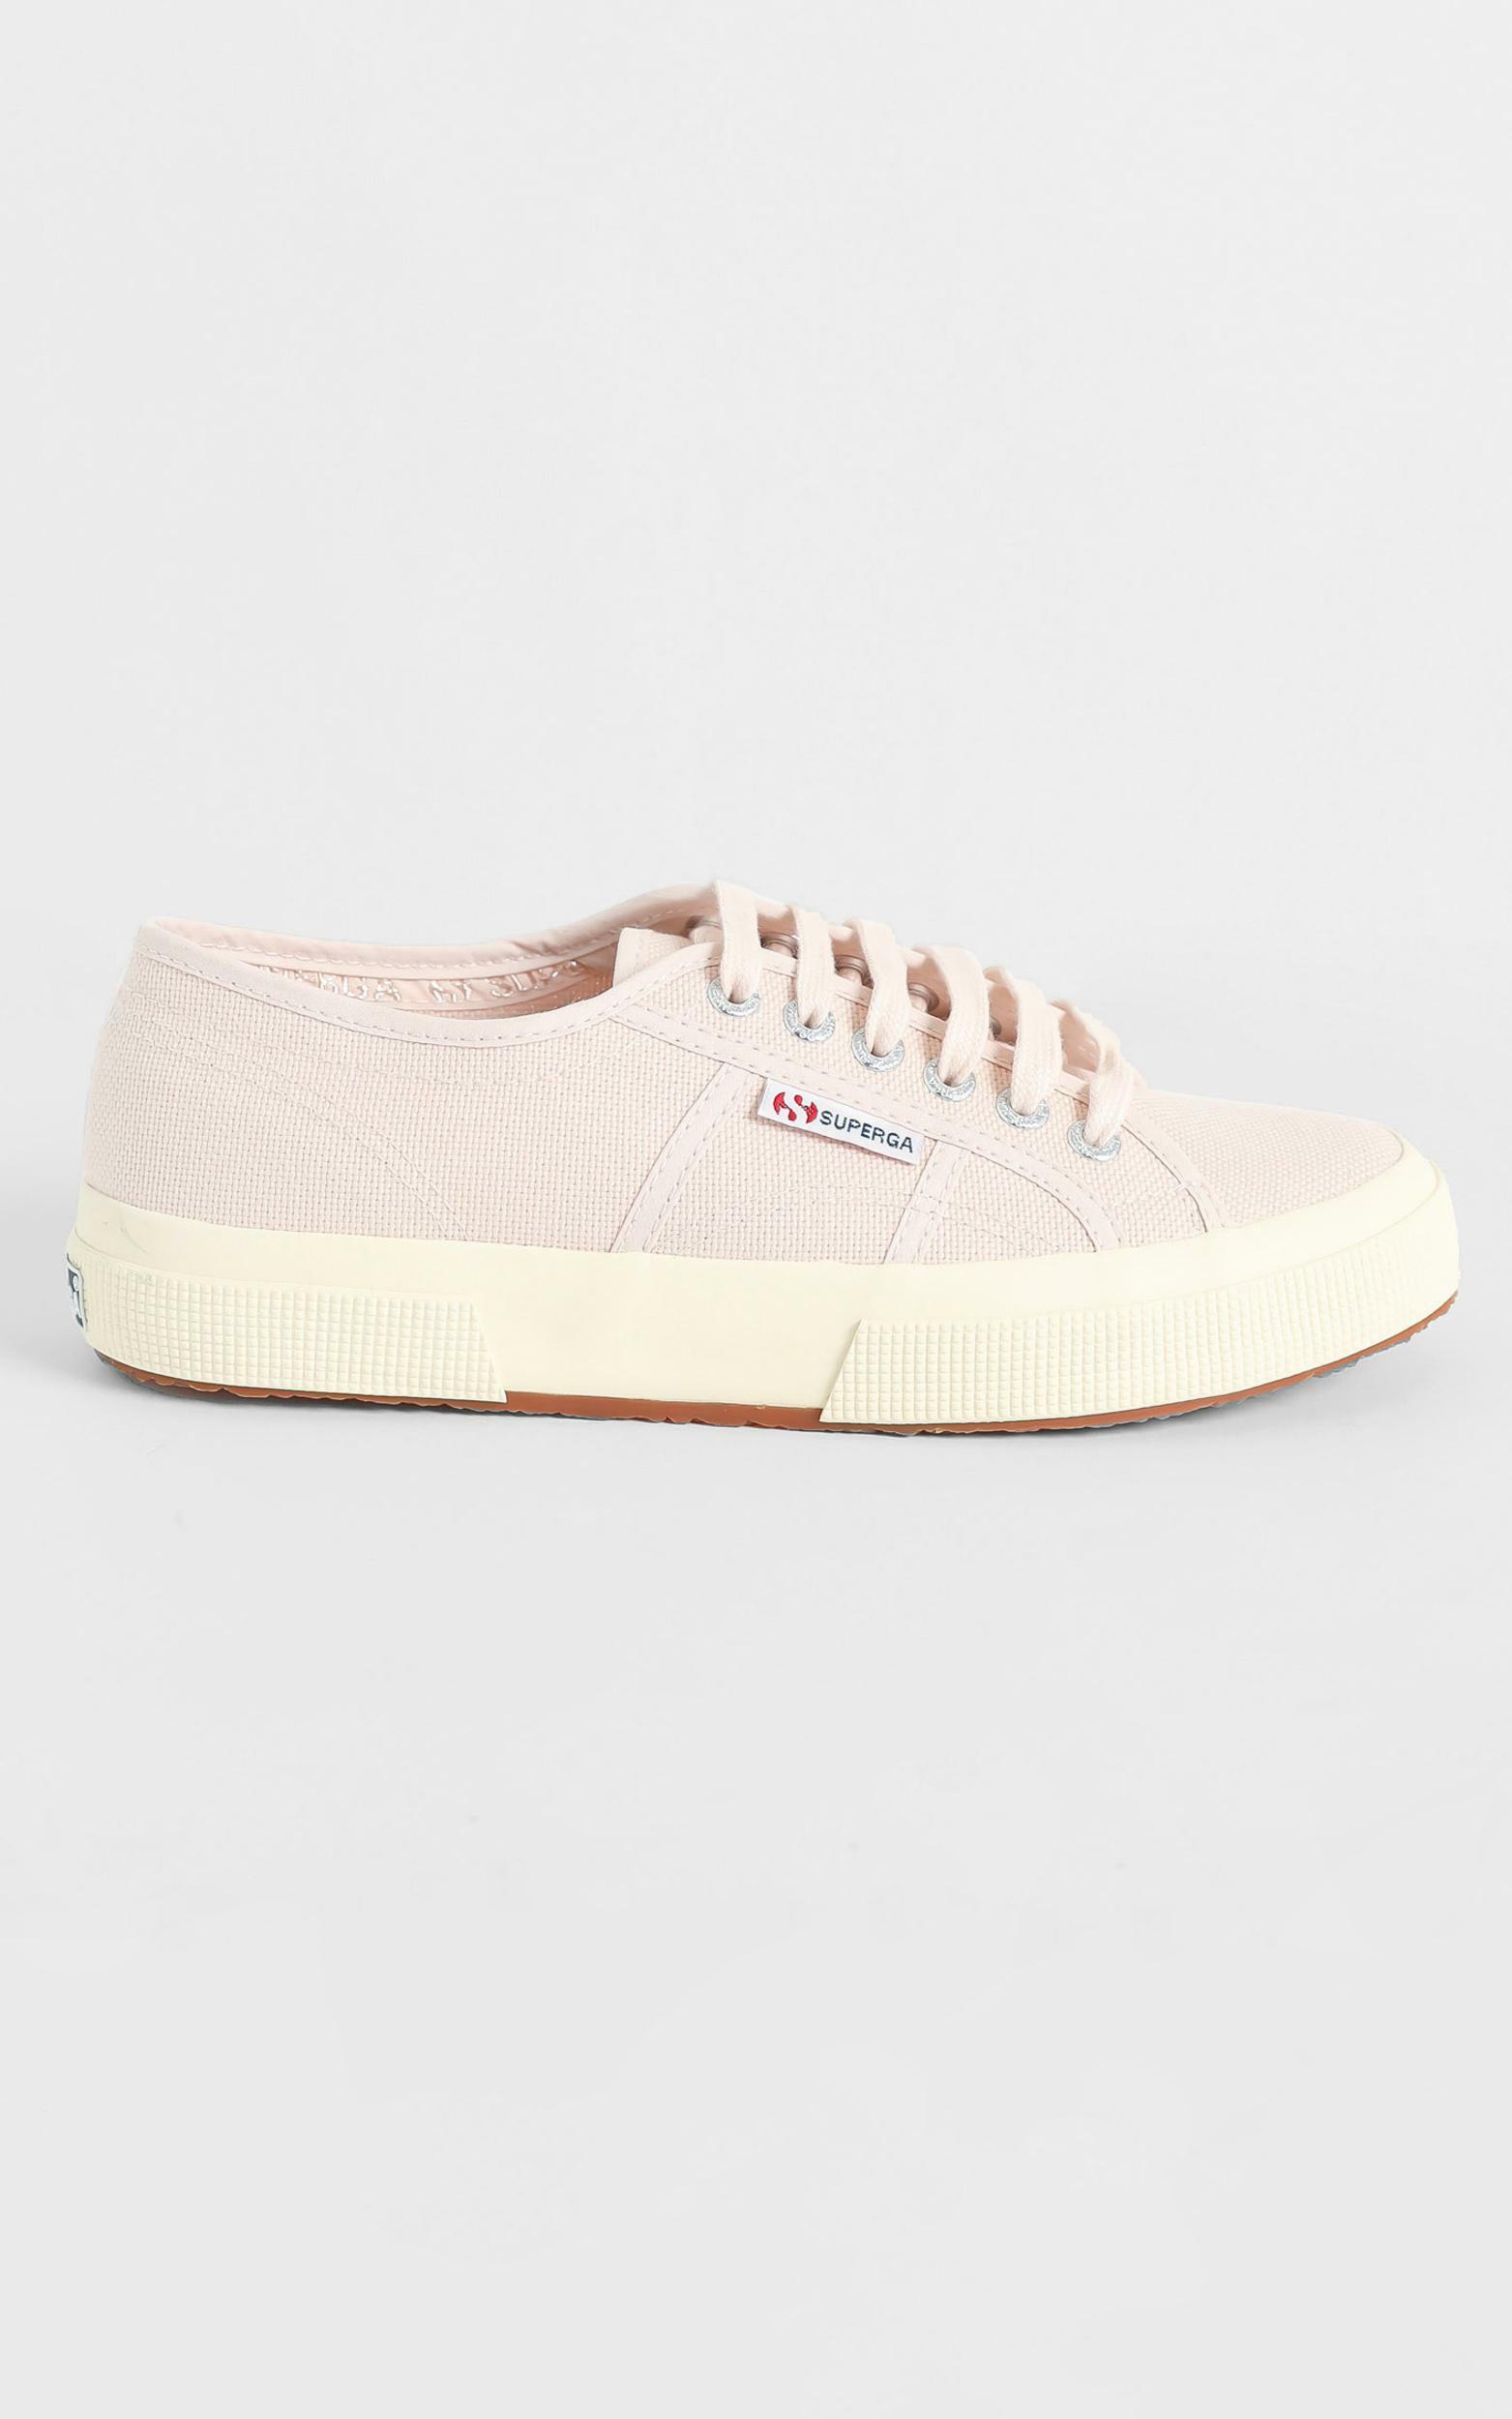 Superga - 2750 Cotu Classic Sneakers in pink peach blush - off white - 05, WHT1, hi-res image number null